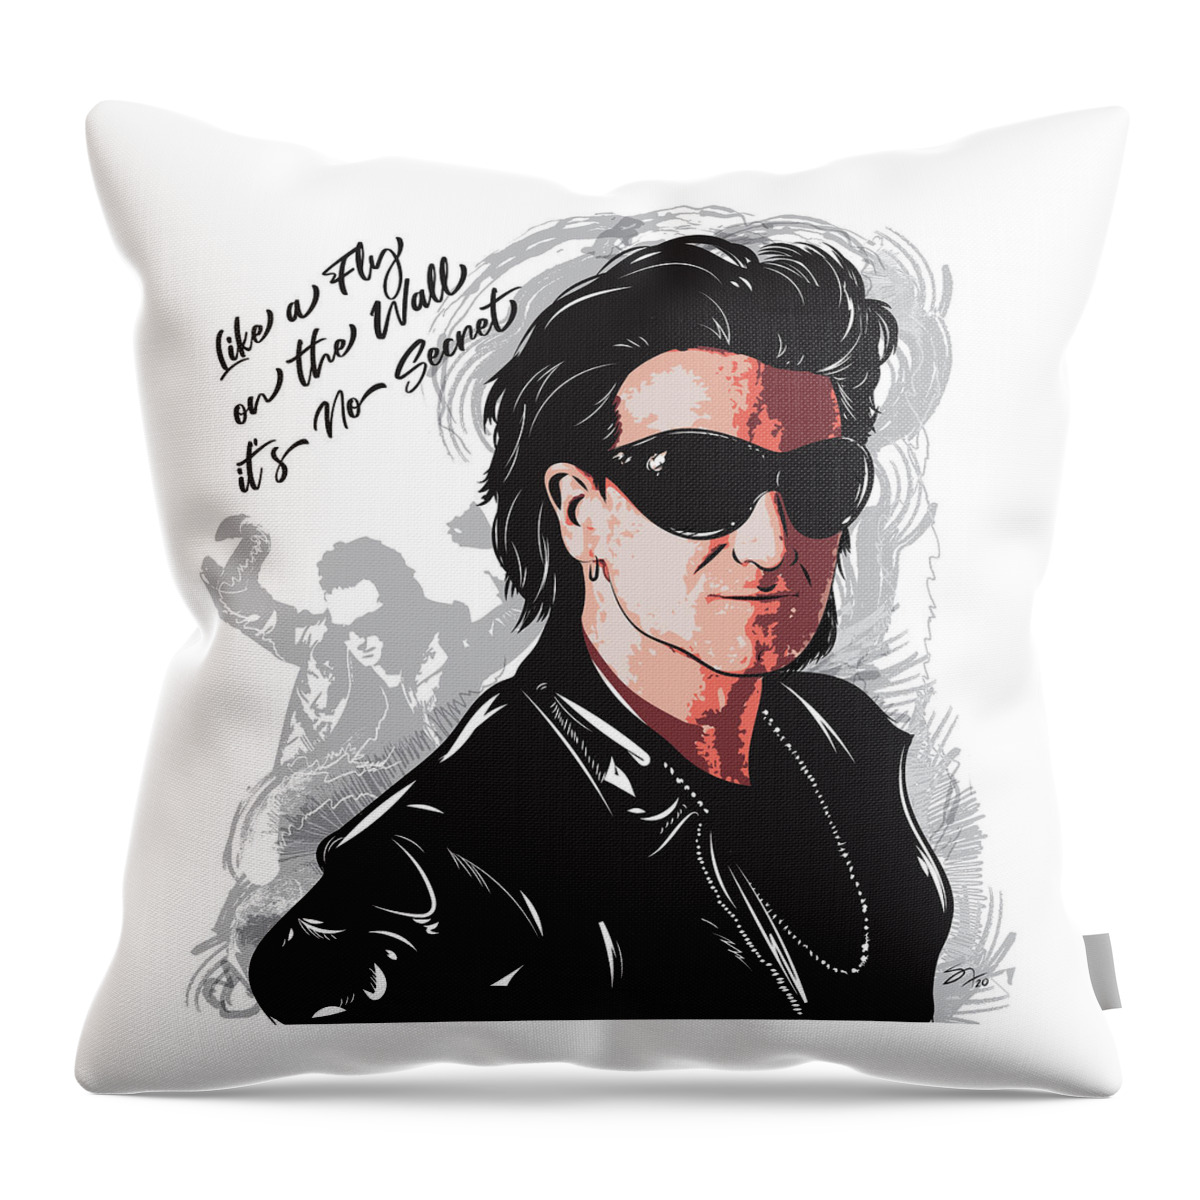 Bono Throw Pillow featuring the digital art The Fly Achtung Baby by Steve Follman